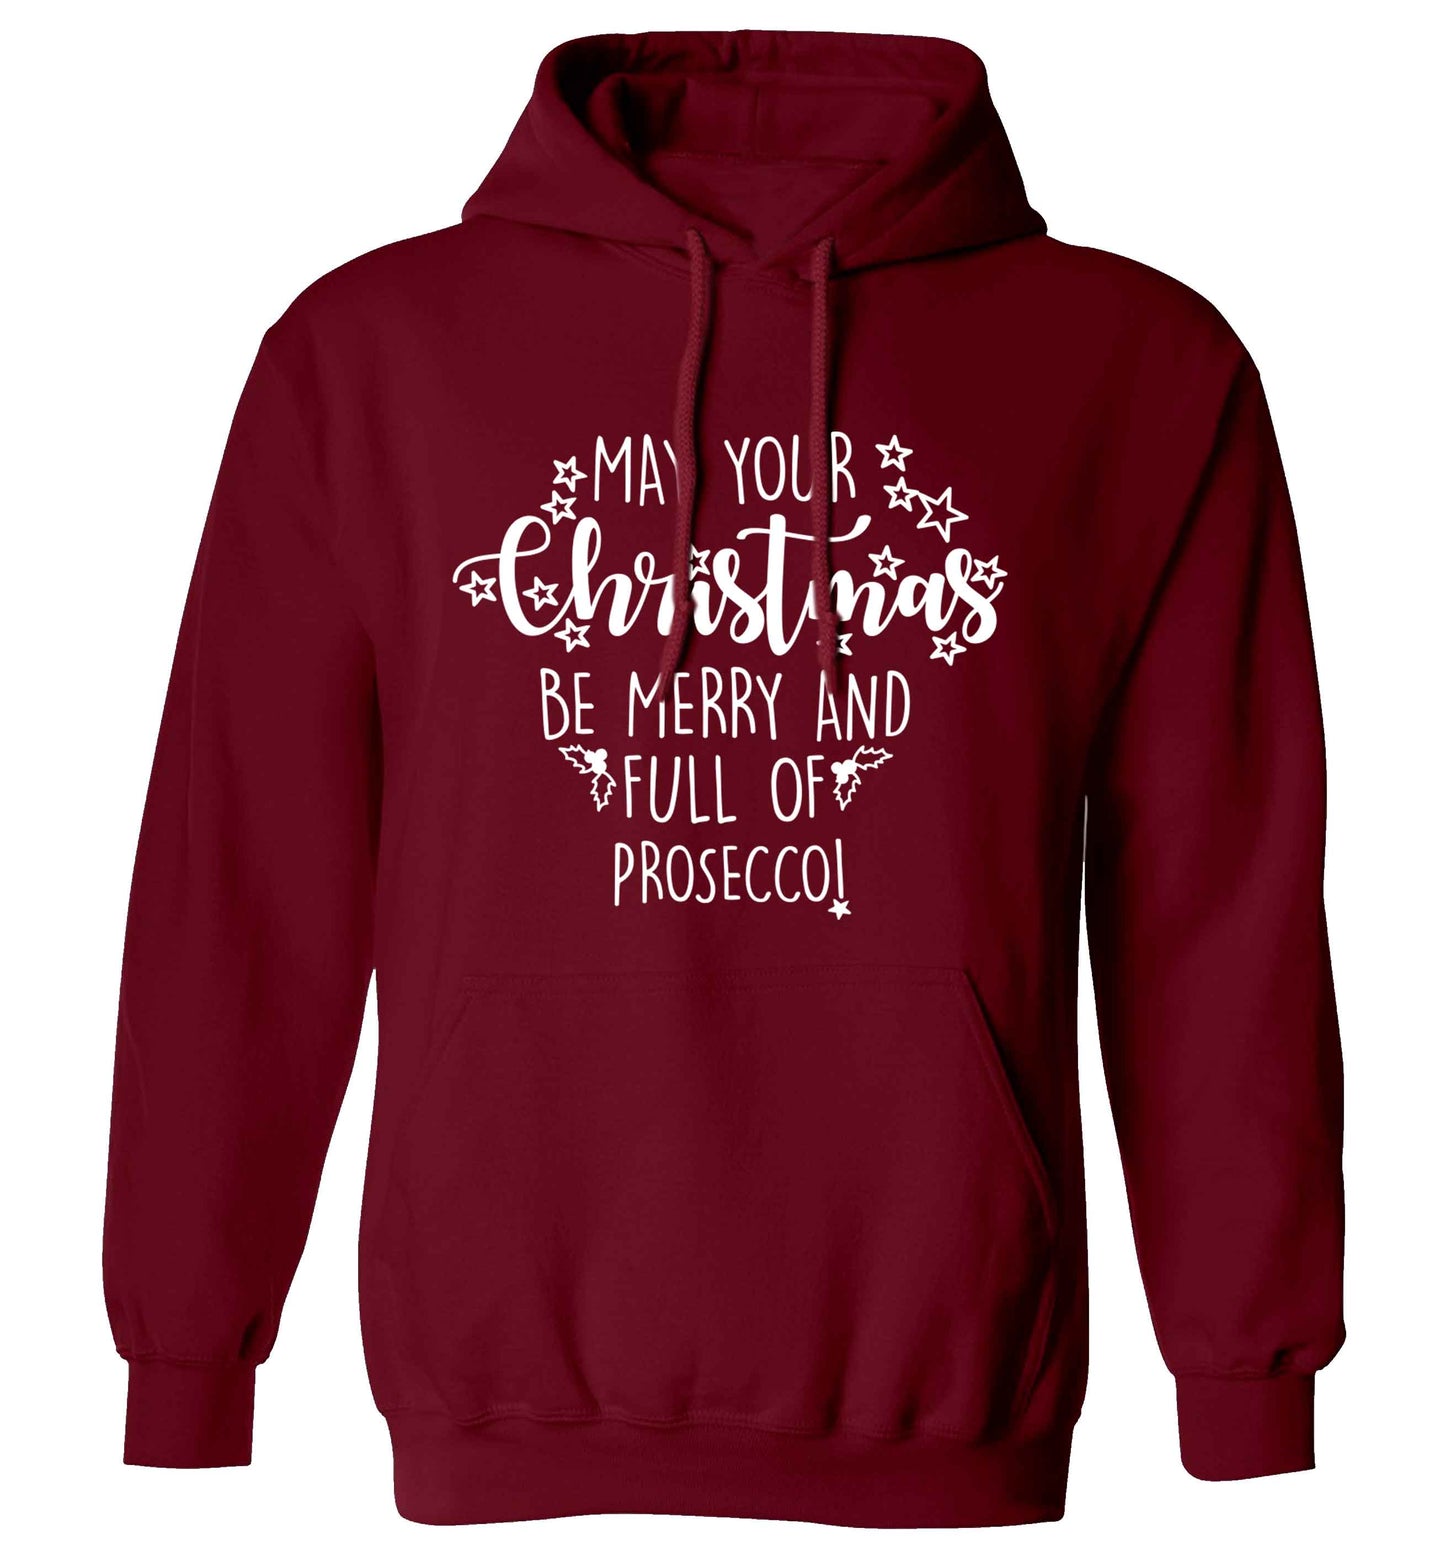 May your Christmas be merry and full of prosecco adults unisex maroon hoodie 2XL